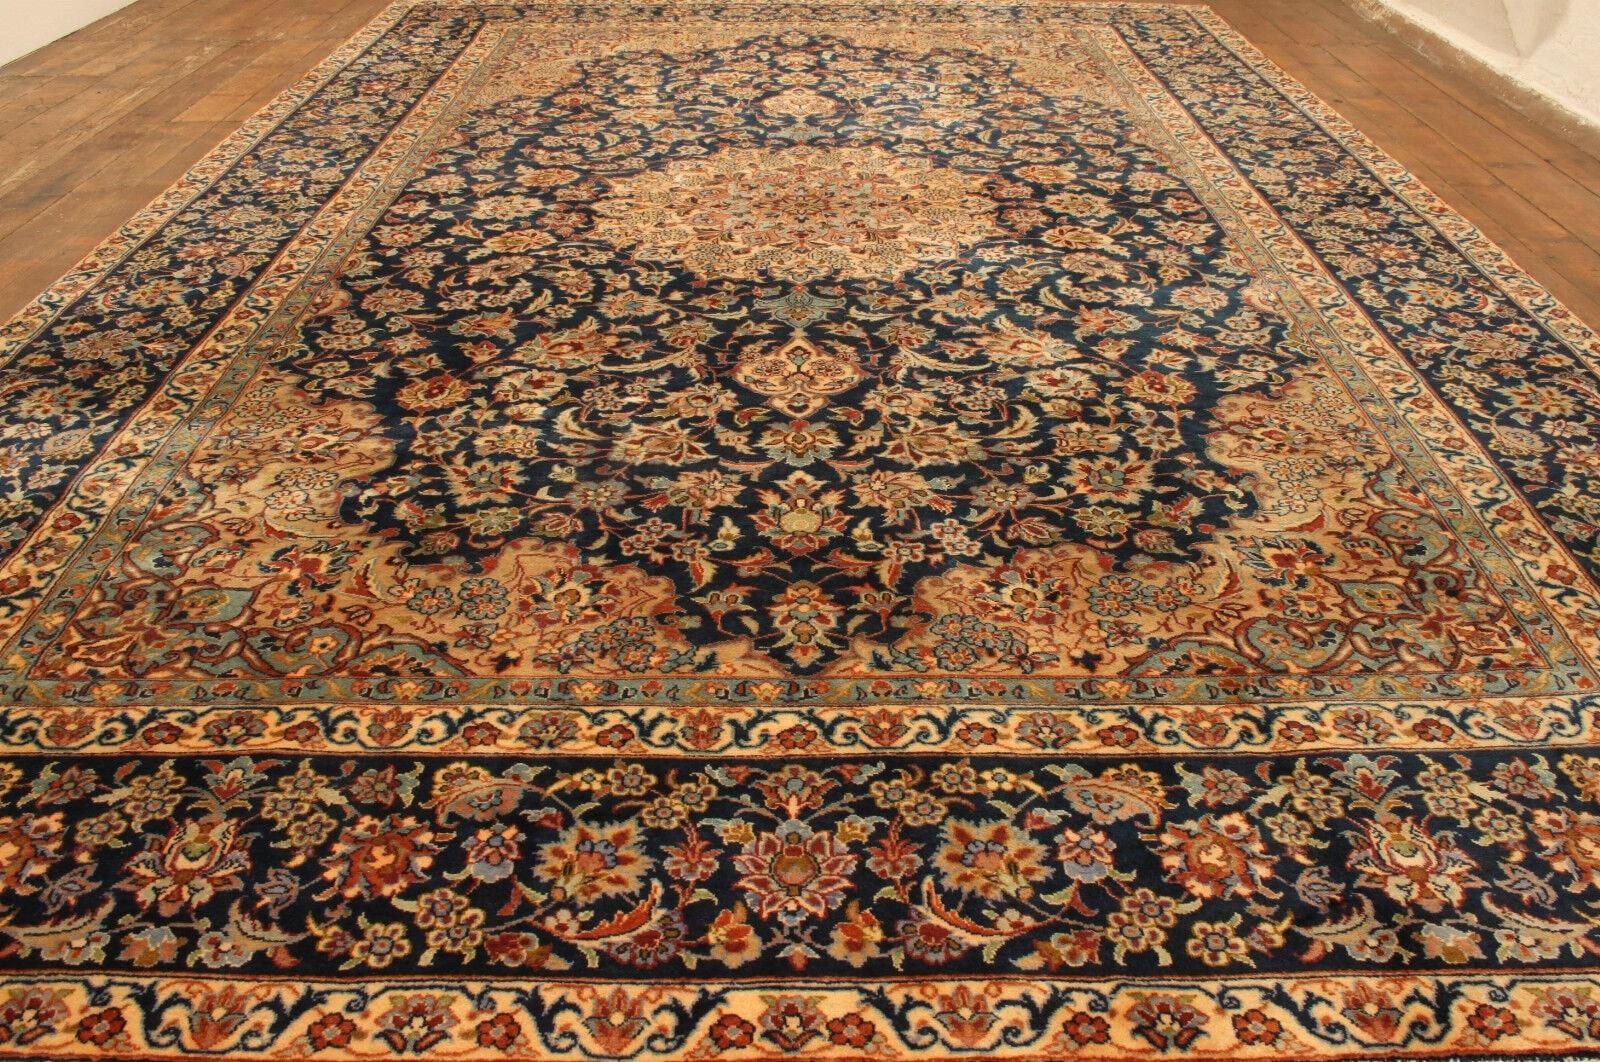 Handmade Vintage Persian Style Isfahan Rug 9.5' x 15', 1970s - 1T29 In Good Condition For Sale In Bordeaux, FR